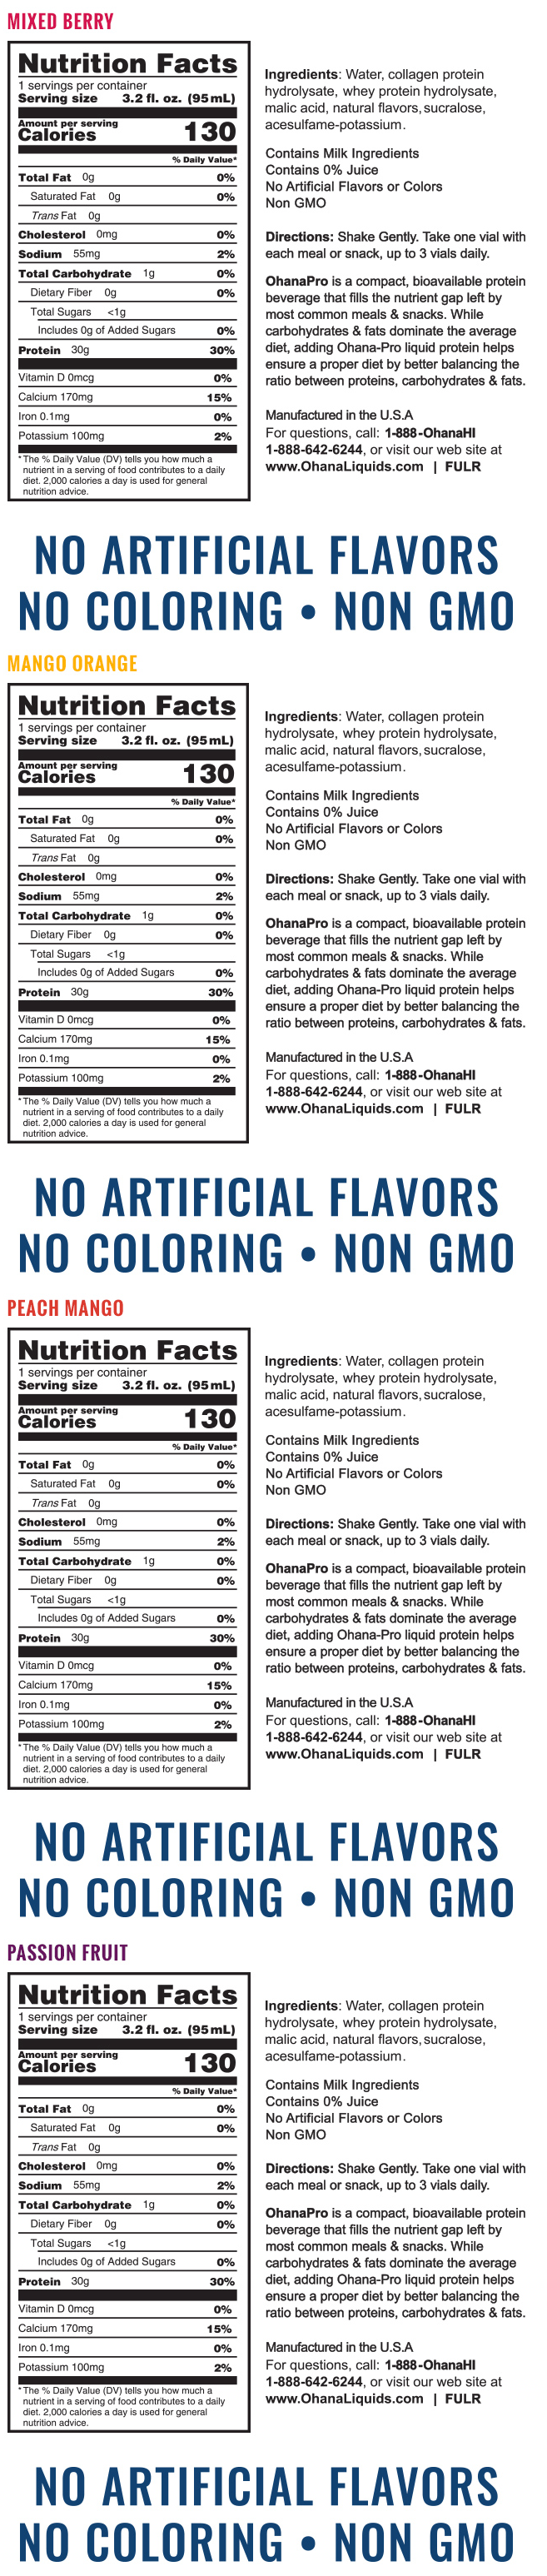 Nutrition label for a mixed berry, mango orange and peach mango serving. Contains 30g protein, no fat, 1g carbs. No artificial flavors or GMOs.